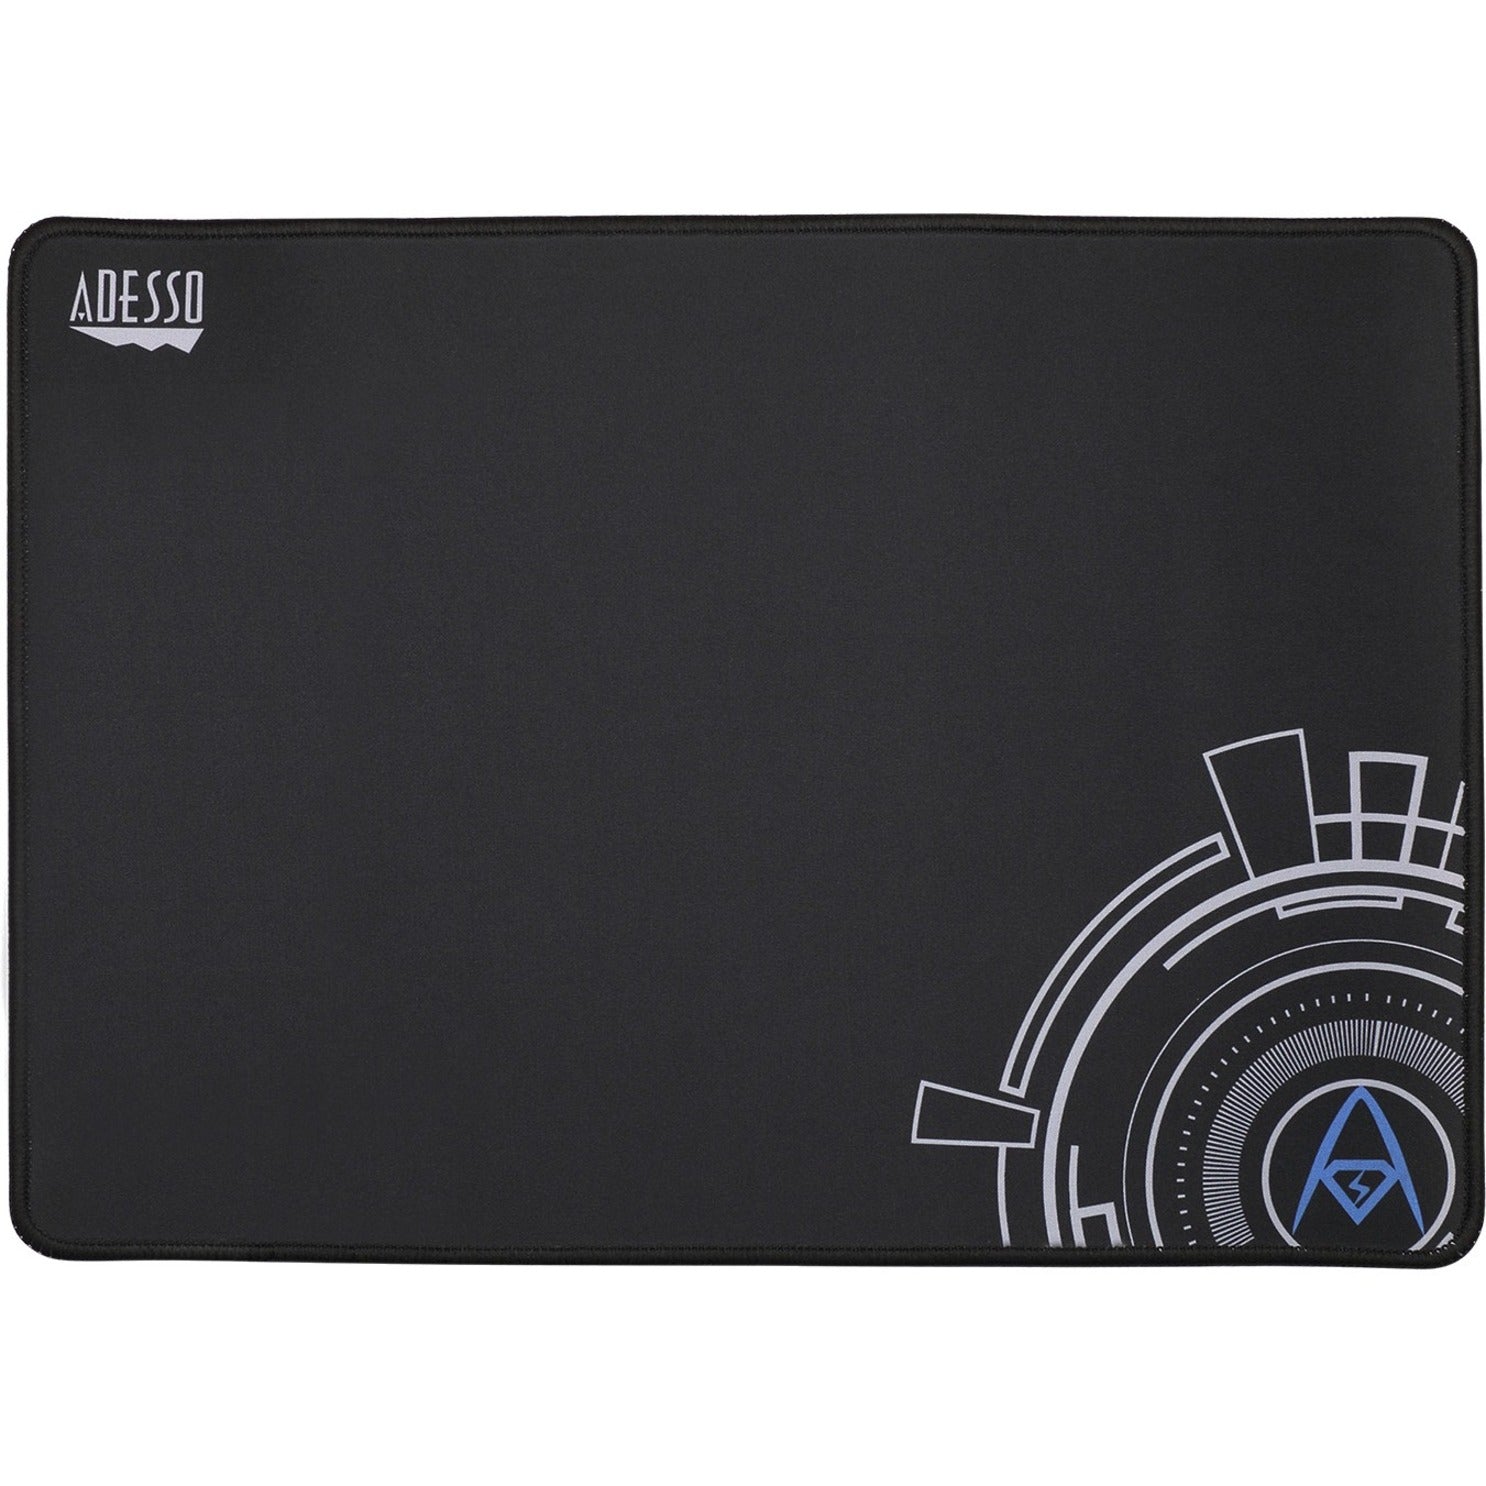 Adesso TRUFORM P102 16 x 12 Inches Gaming Mouse Pad, Peel Resistant, Anti-slip, Scratch Resistant